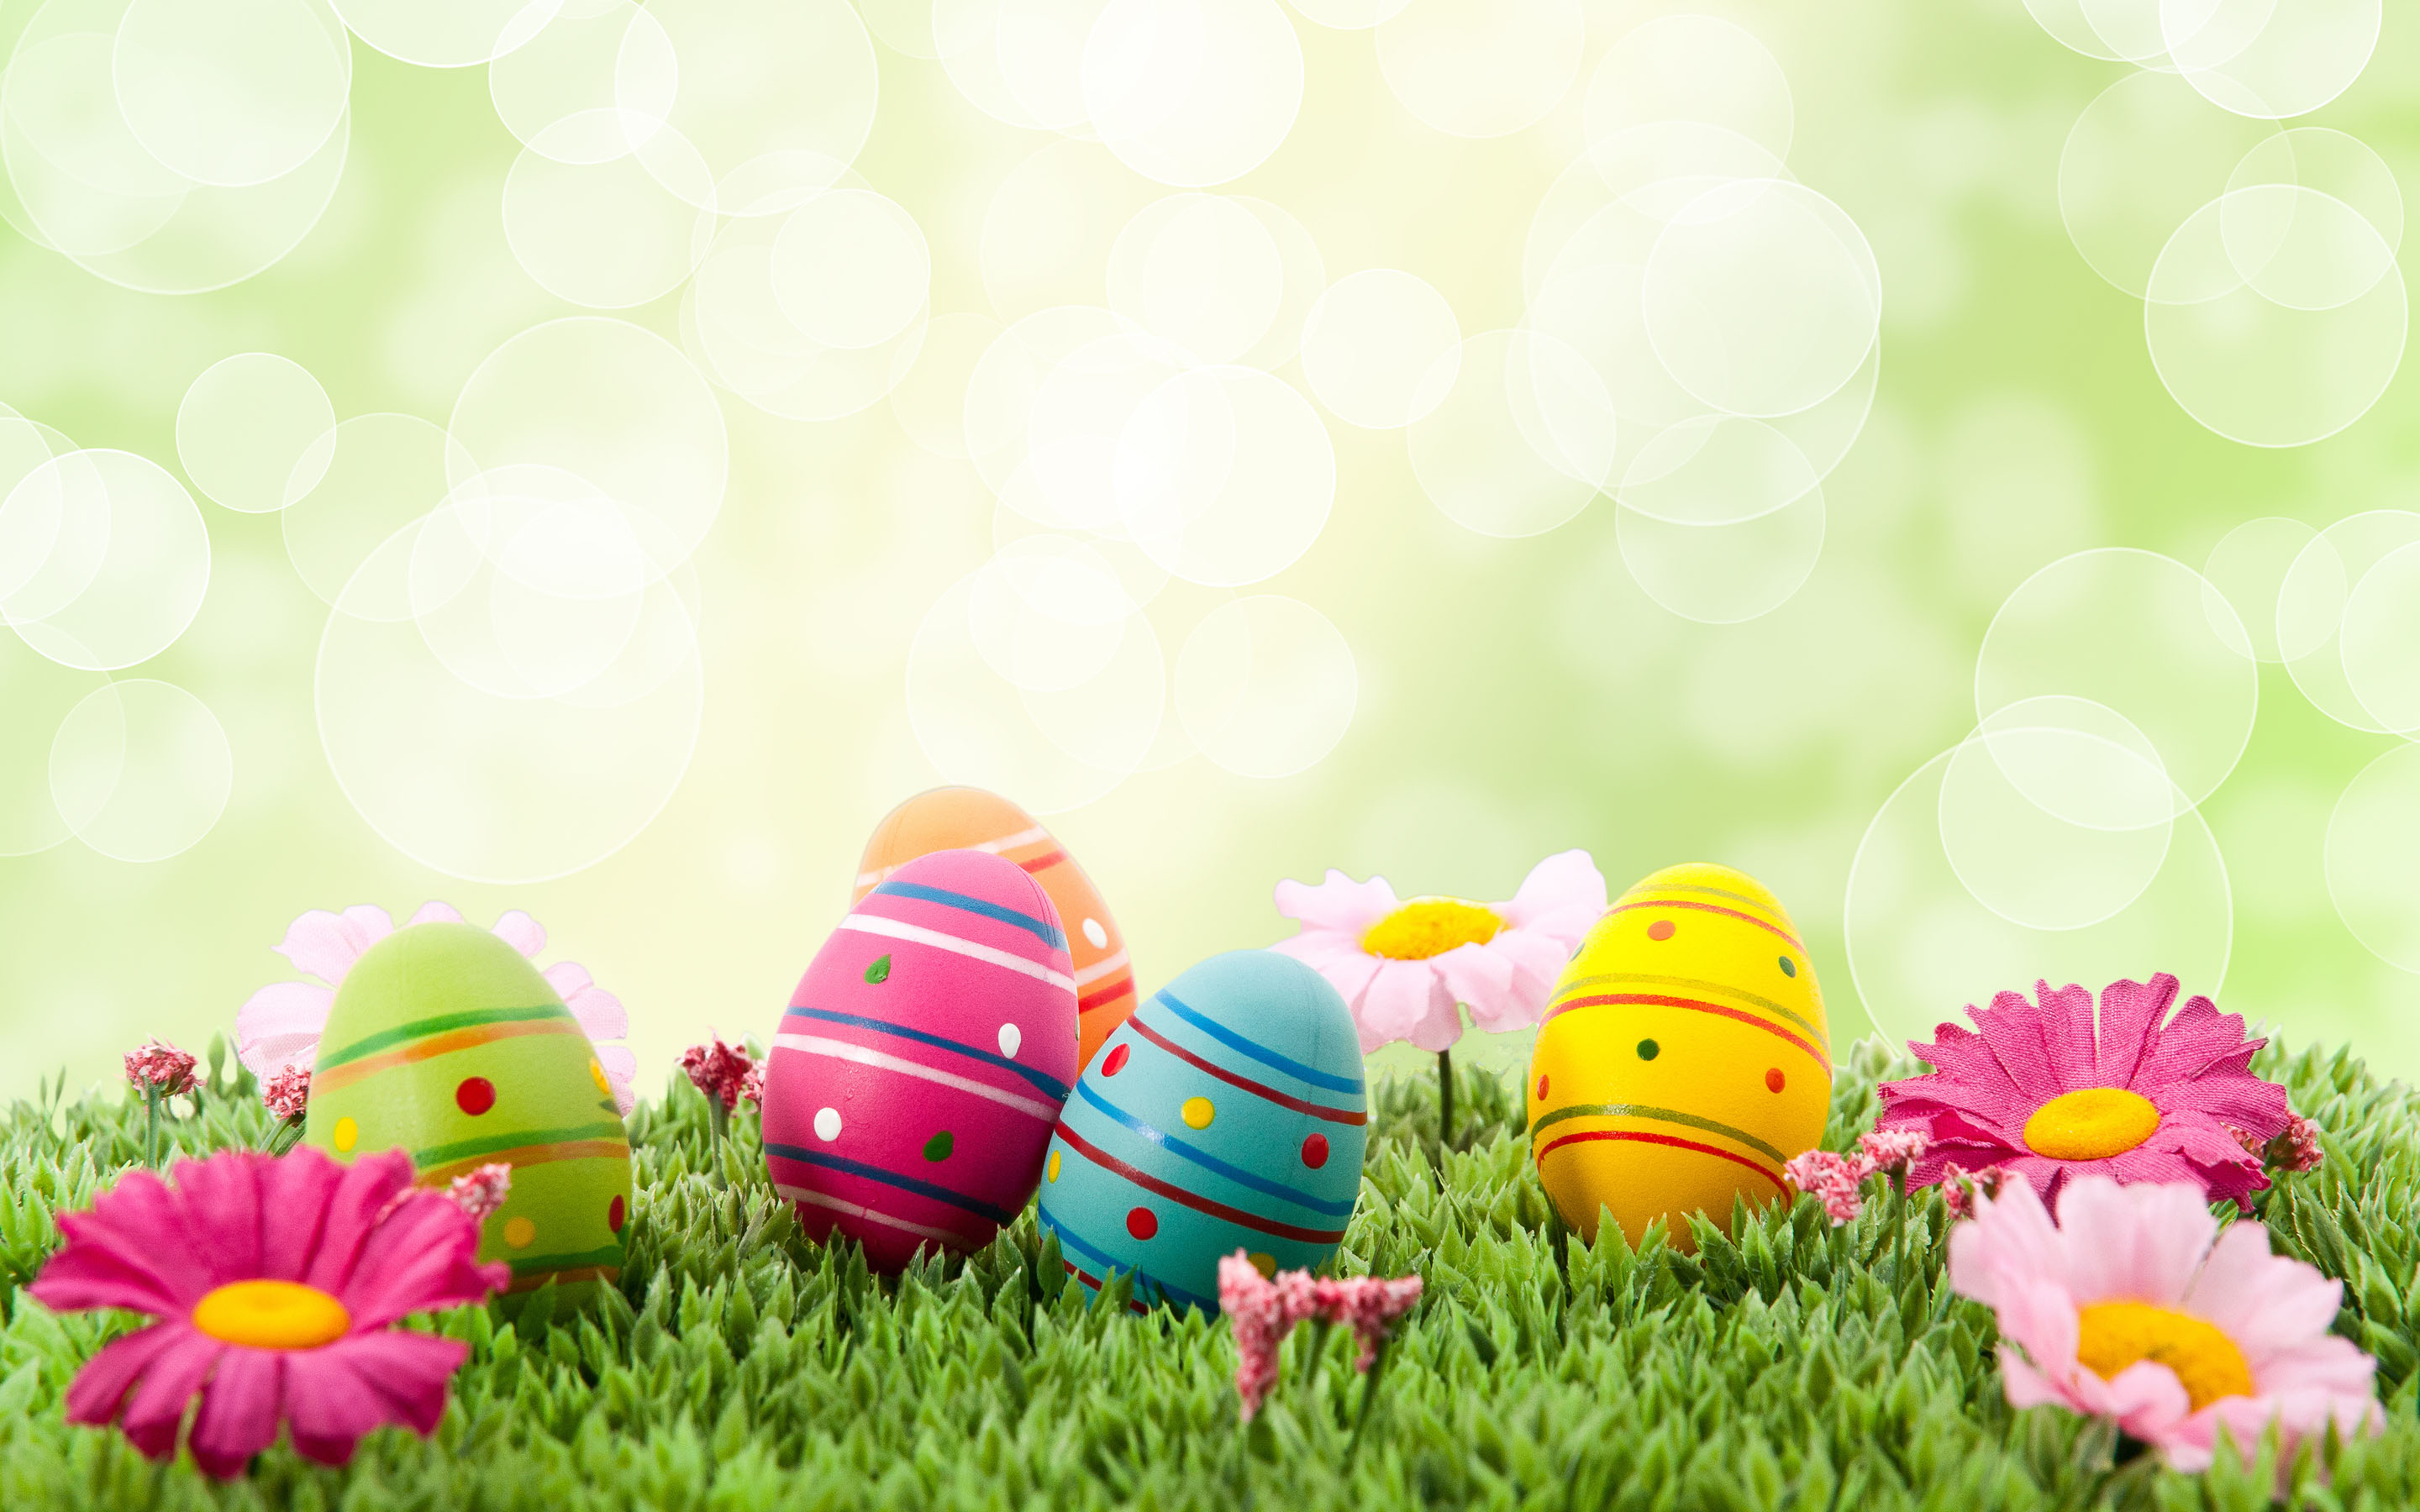 3D Happy Easter Wallpapers Screensaver HD Free for iPhone